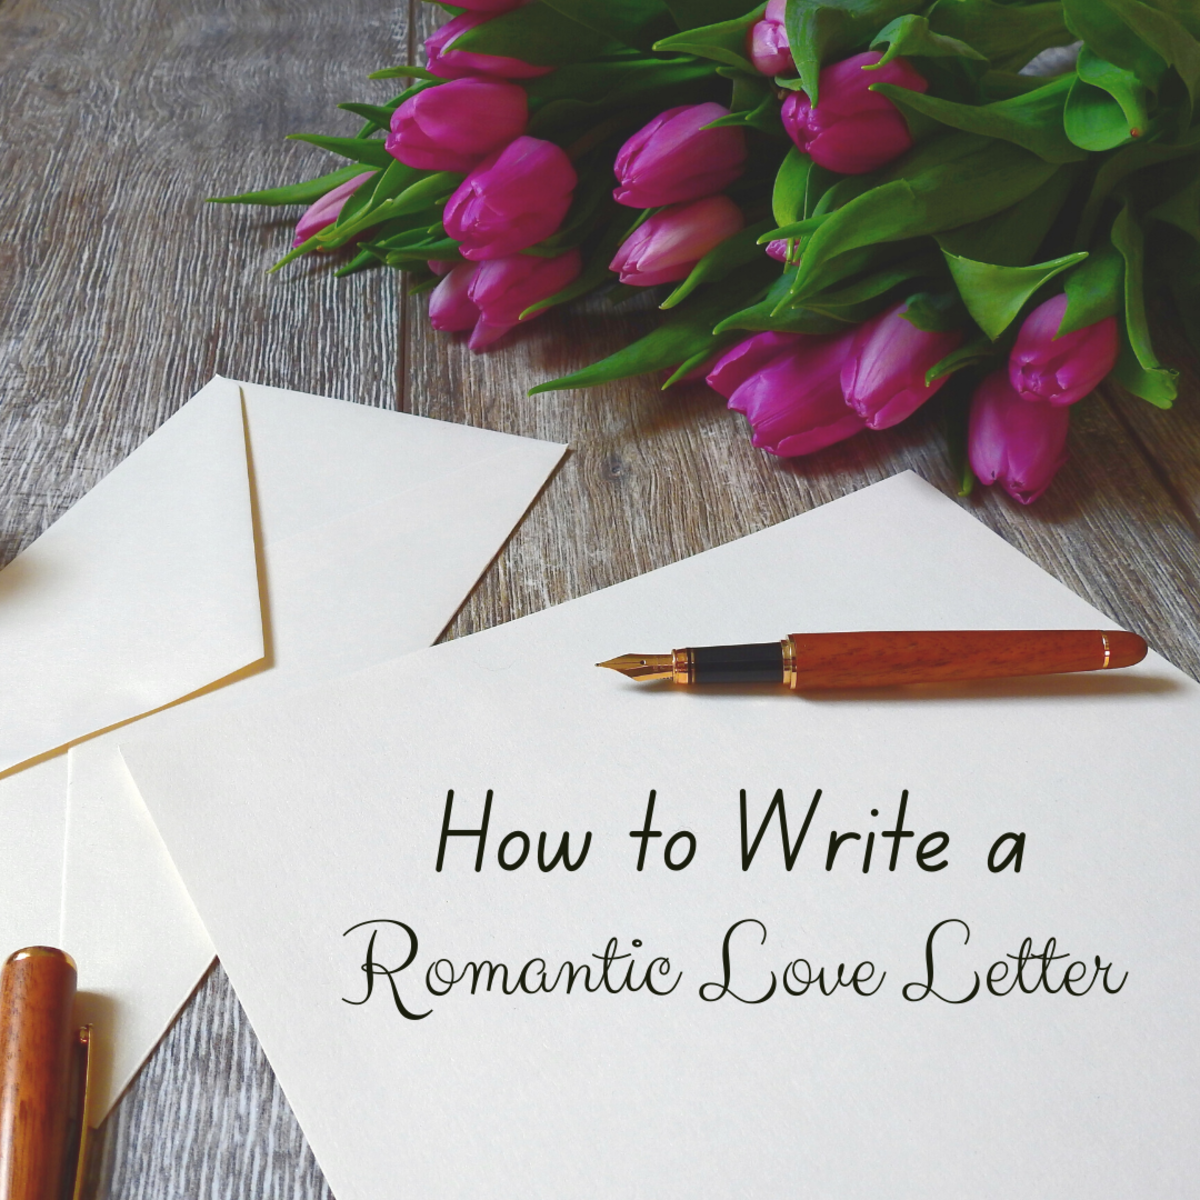 Passionate love making letters